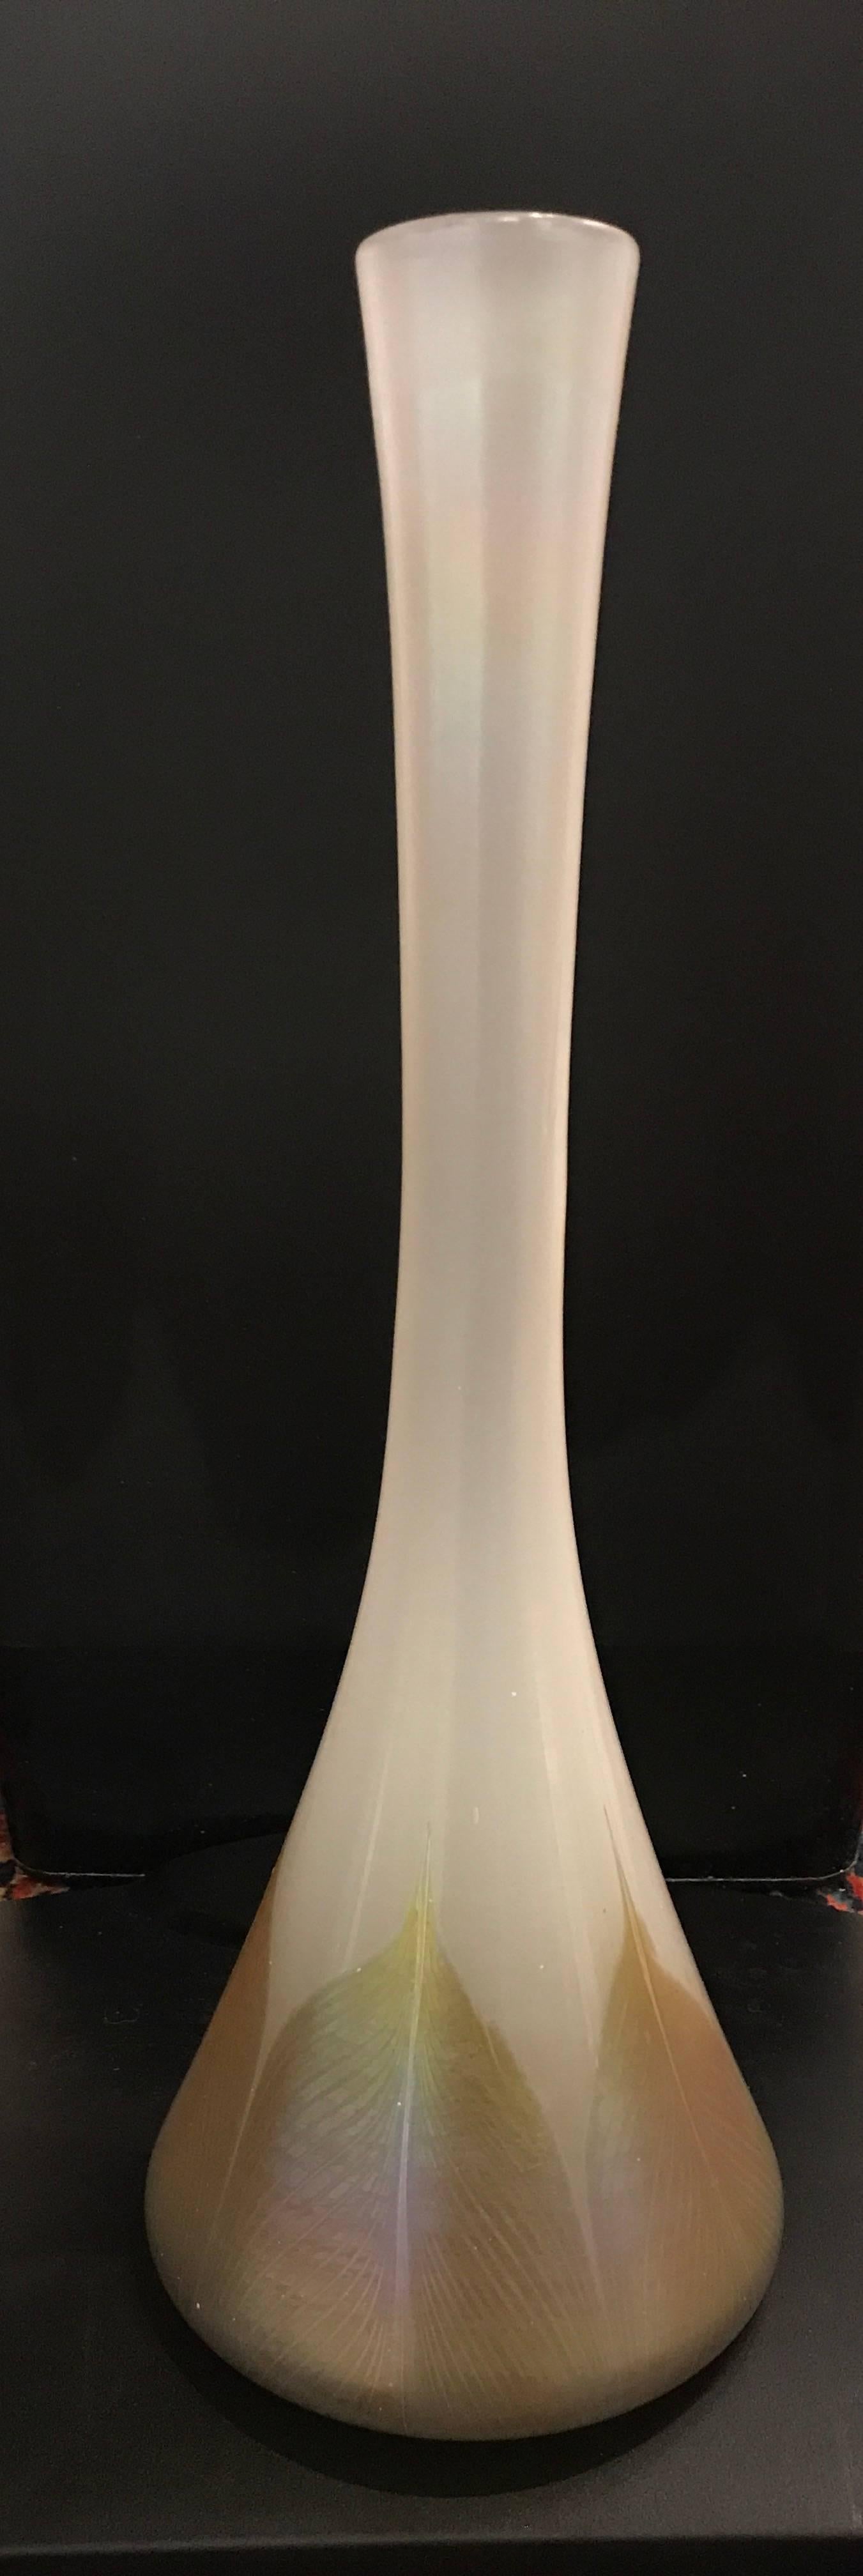 Large Antique Louis Comfort Tiffany Favrile vase  Crafted by the L. C. Tiffany Studios of fine quality Tiffany patented favrile art glass  Features an iridescent opaque white color with pulled feather decoration on the base  Signed “7844 J L.C.